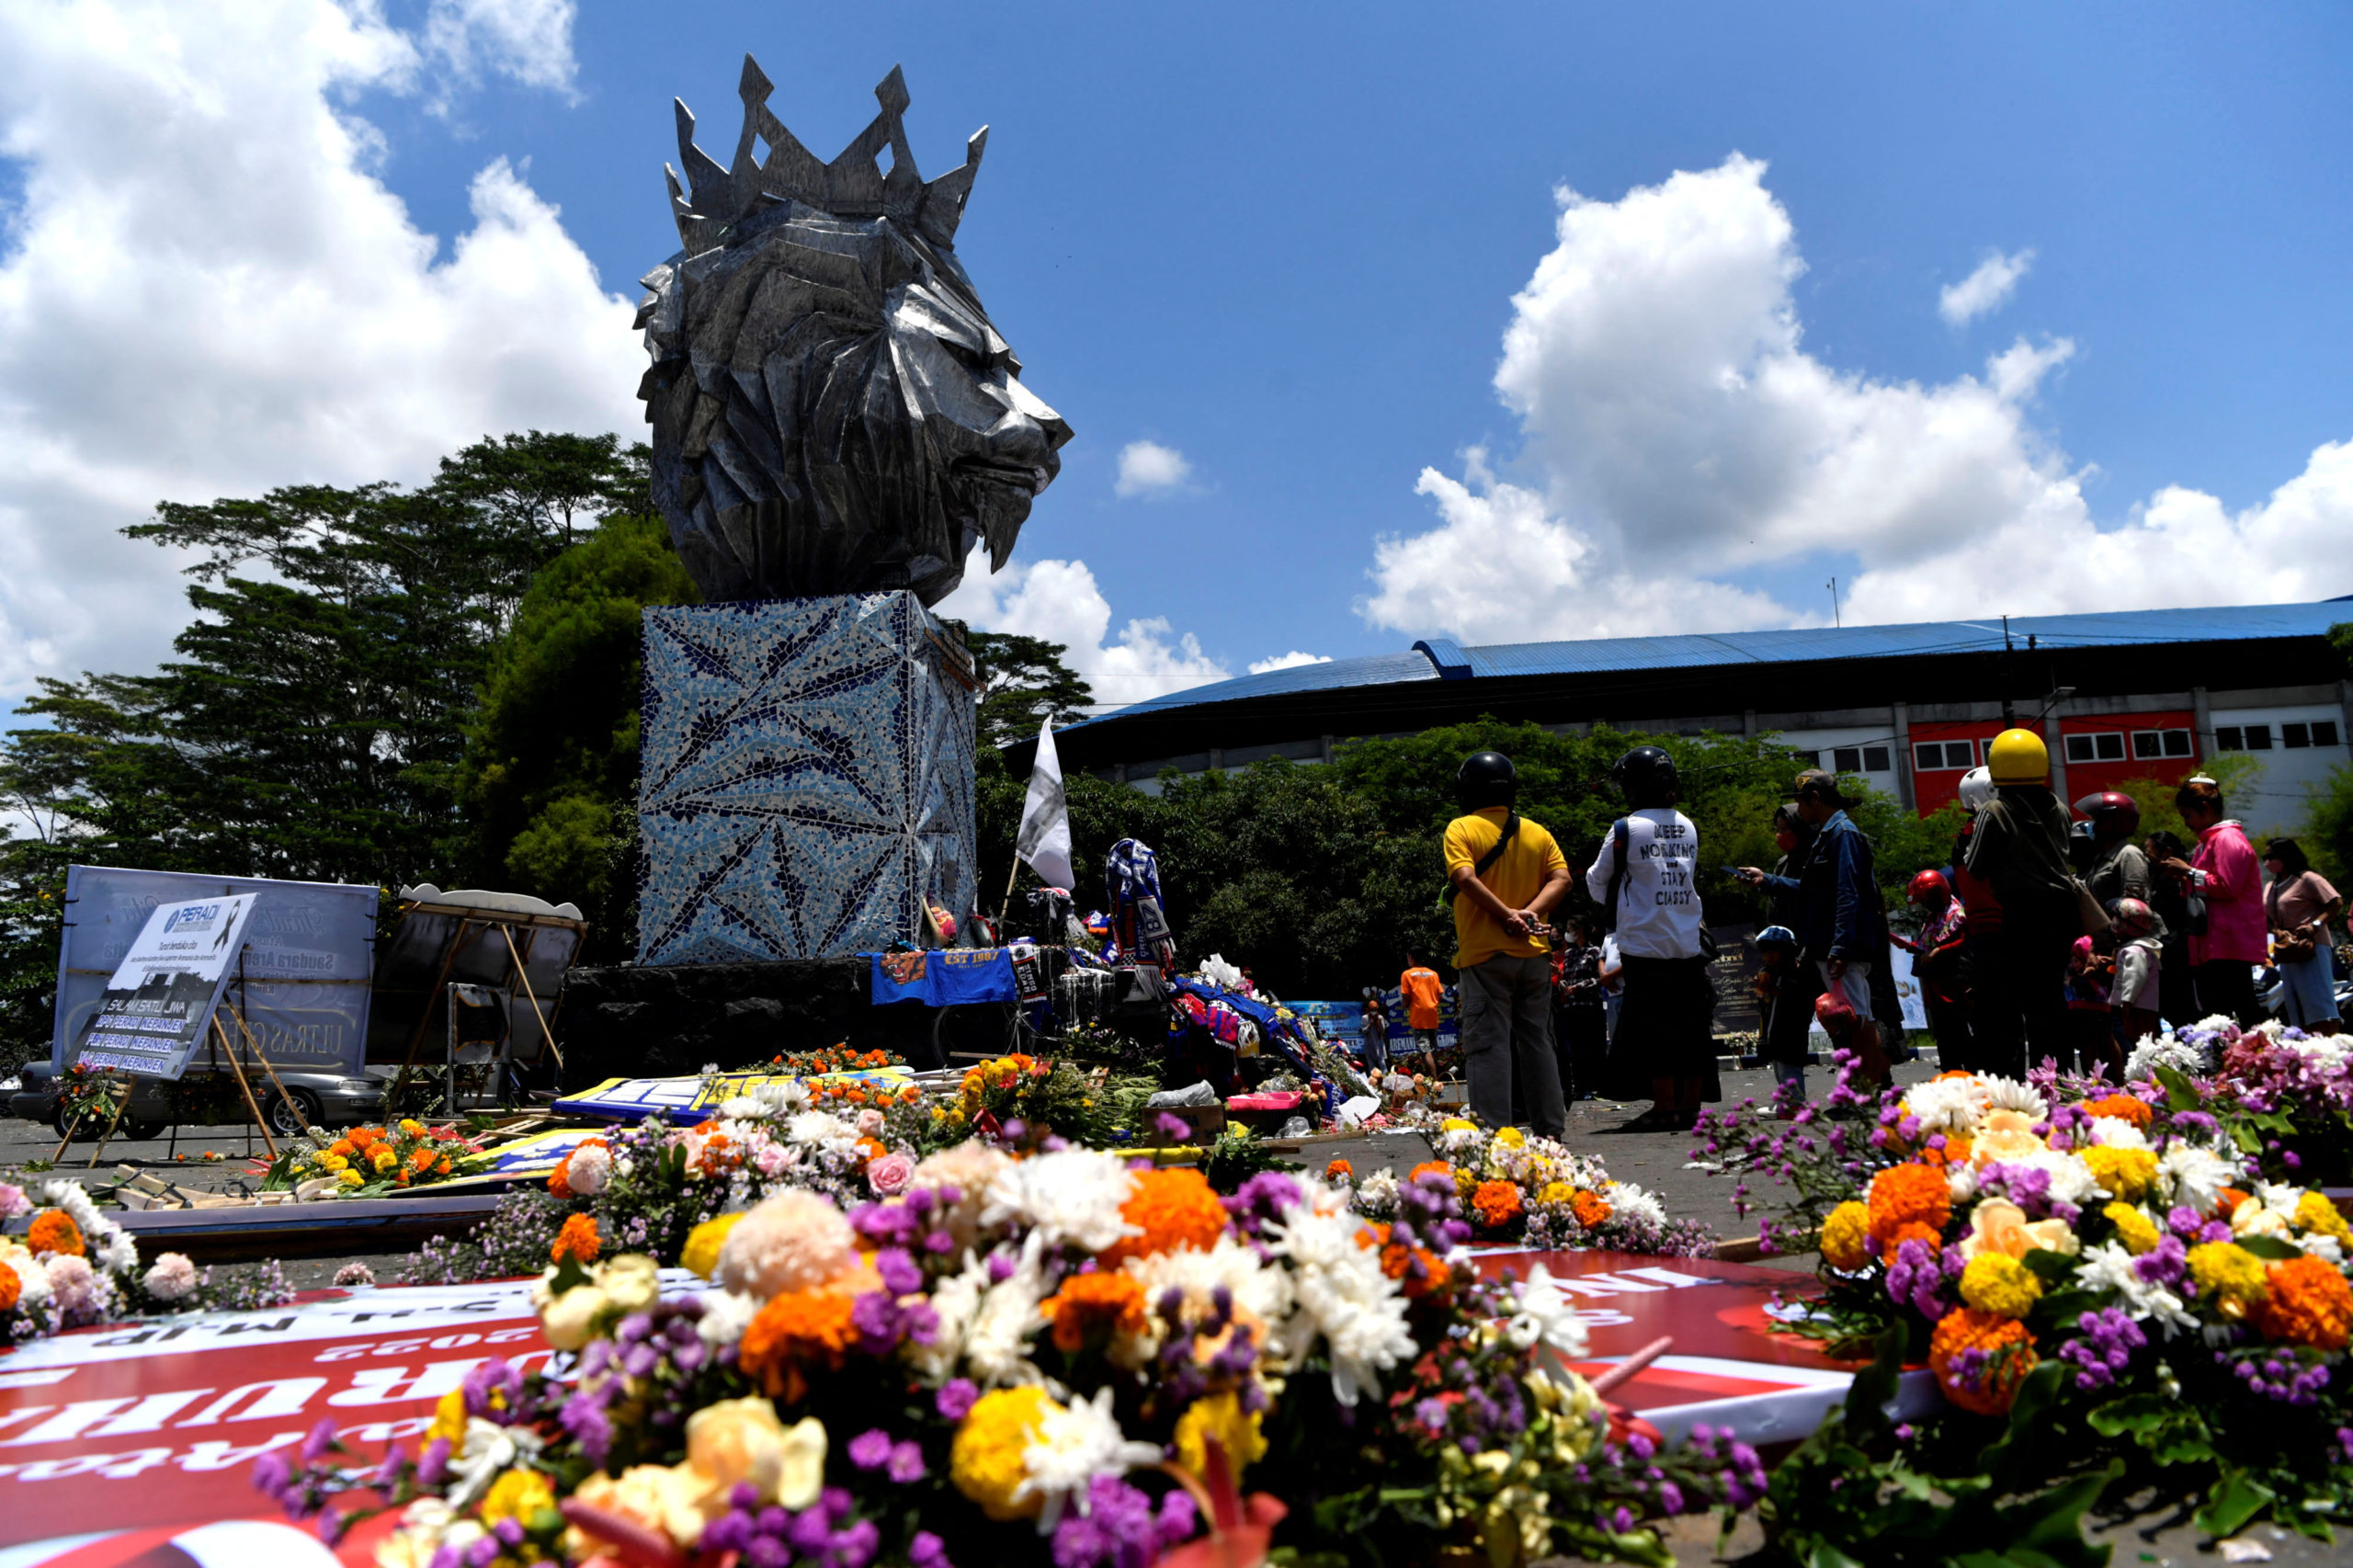 FILE PHOTO: People gather at the Lion Statue of Kanjuruhan Stadium as they pay their condolences for the victims of a riot and stampede following a soccer match between Arema vs Persebaya Surabaya in Malang, East Java province, Indonesia, October 4, 2022, in this photo taken by Antara Foto.